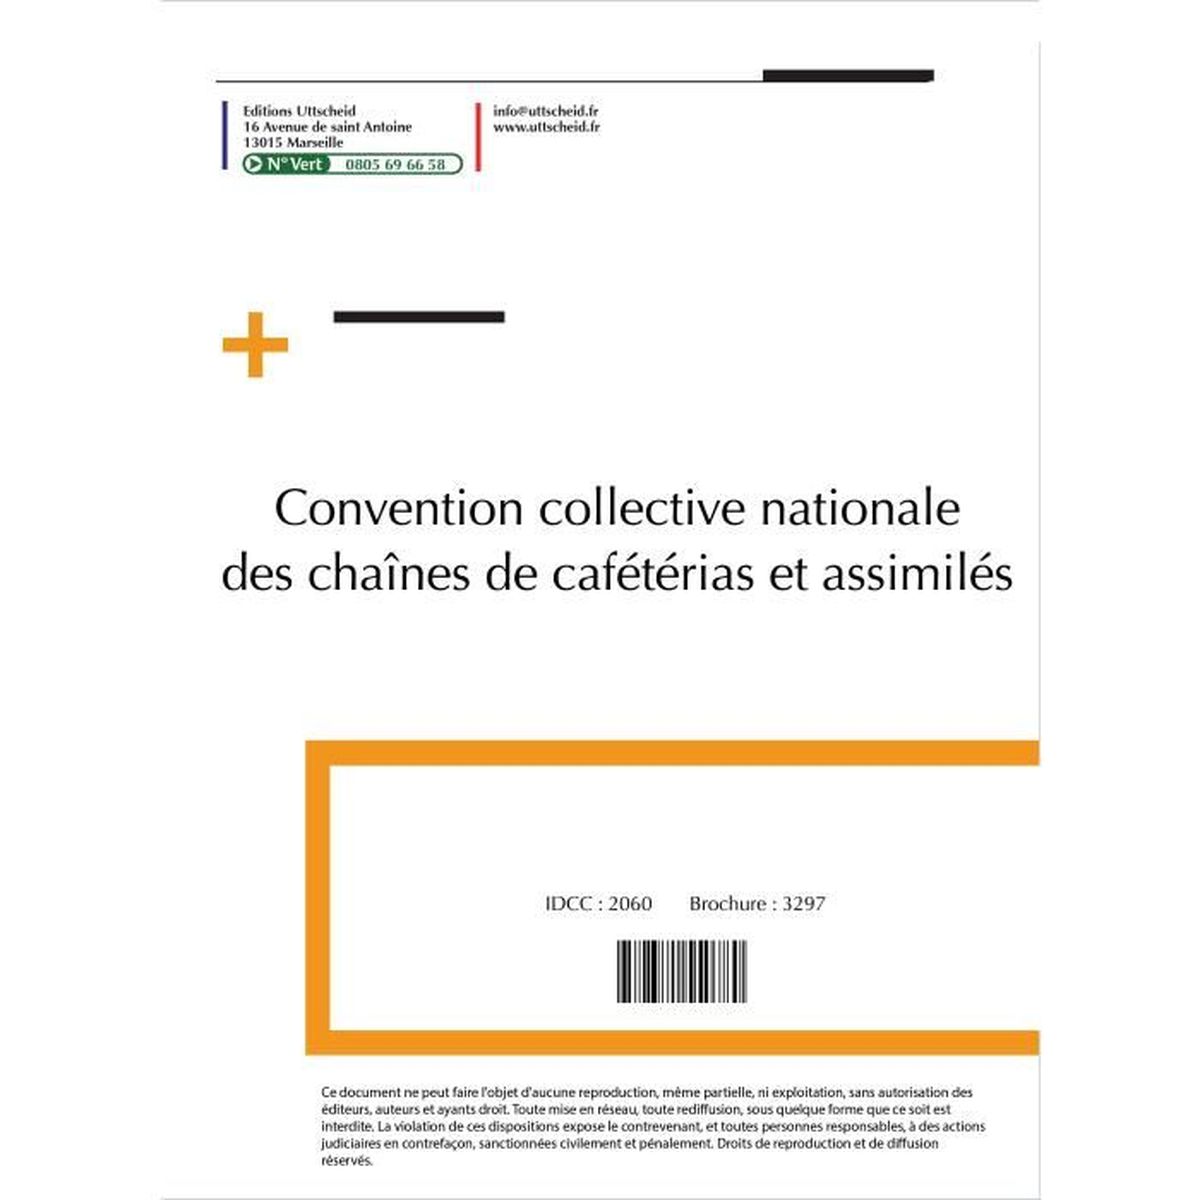 Grille de Salaire Uttscheid Convention collective nationale Immobilier 2019